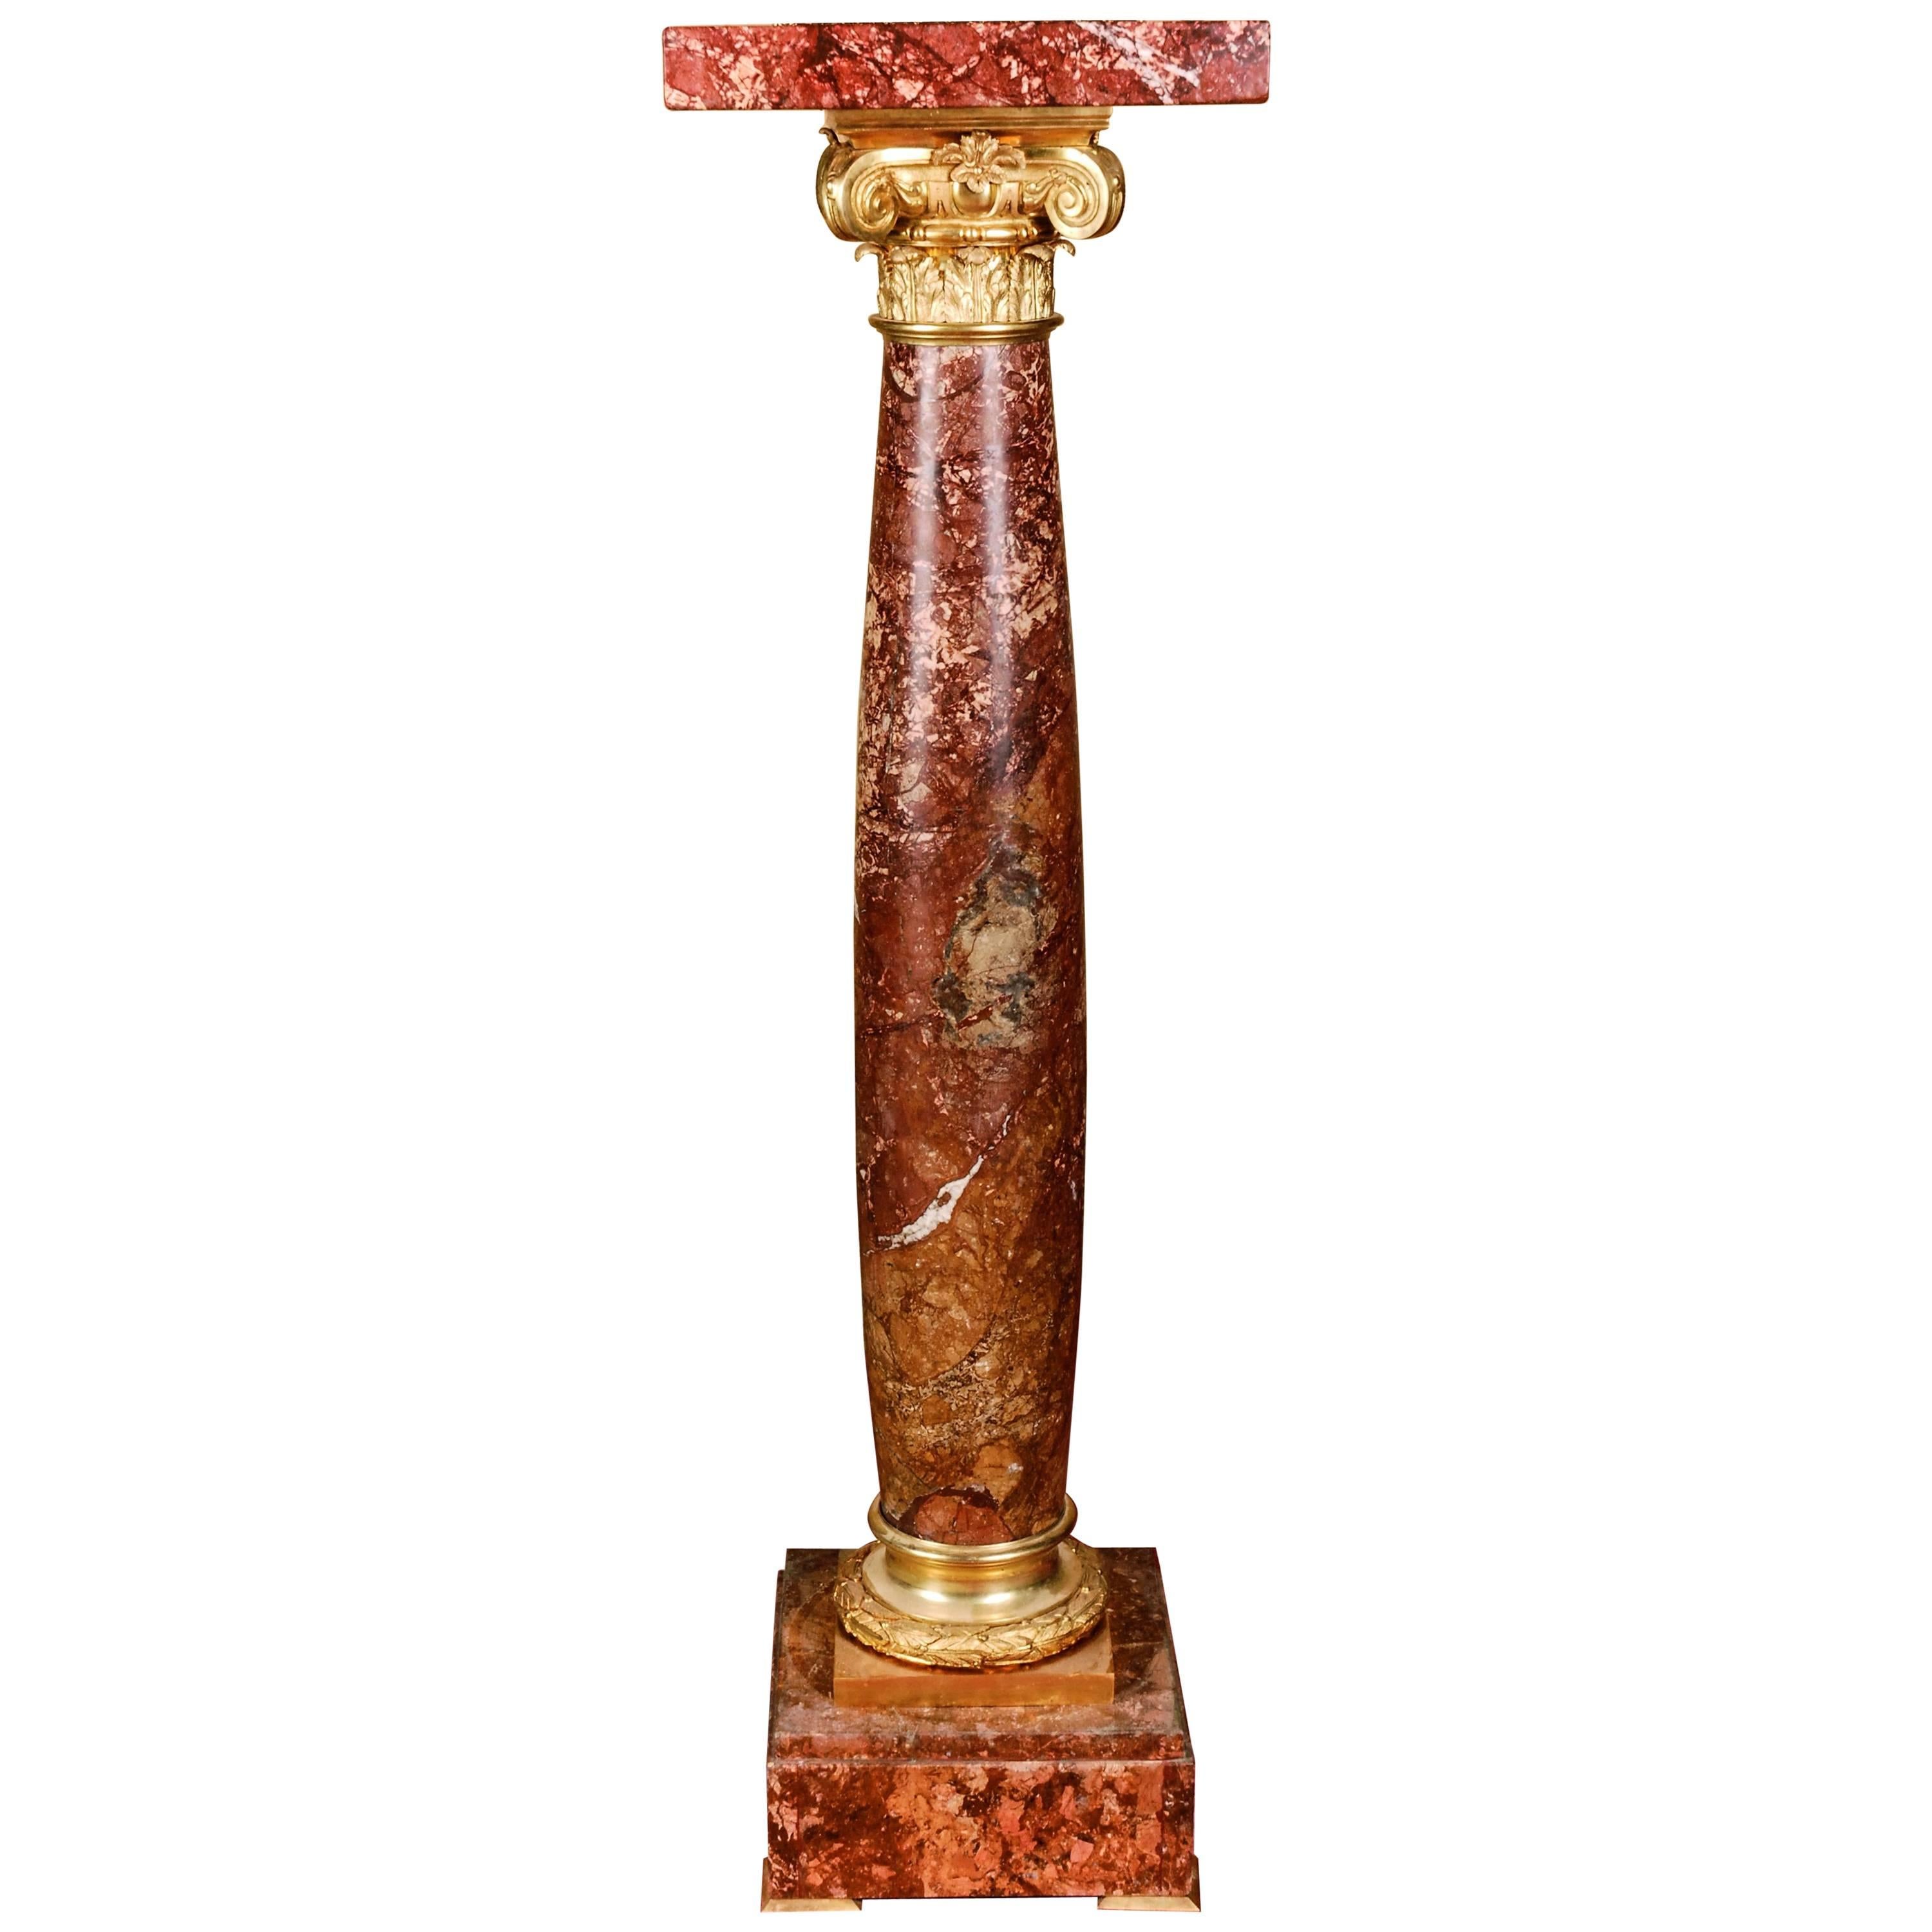 20th Century Ornamental Marble Column in Classicism Style Bordeaux Red Color